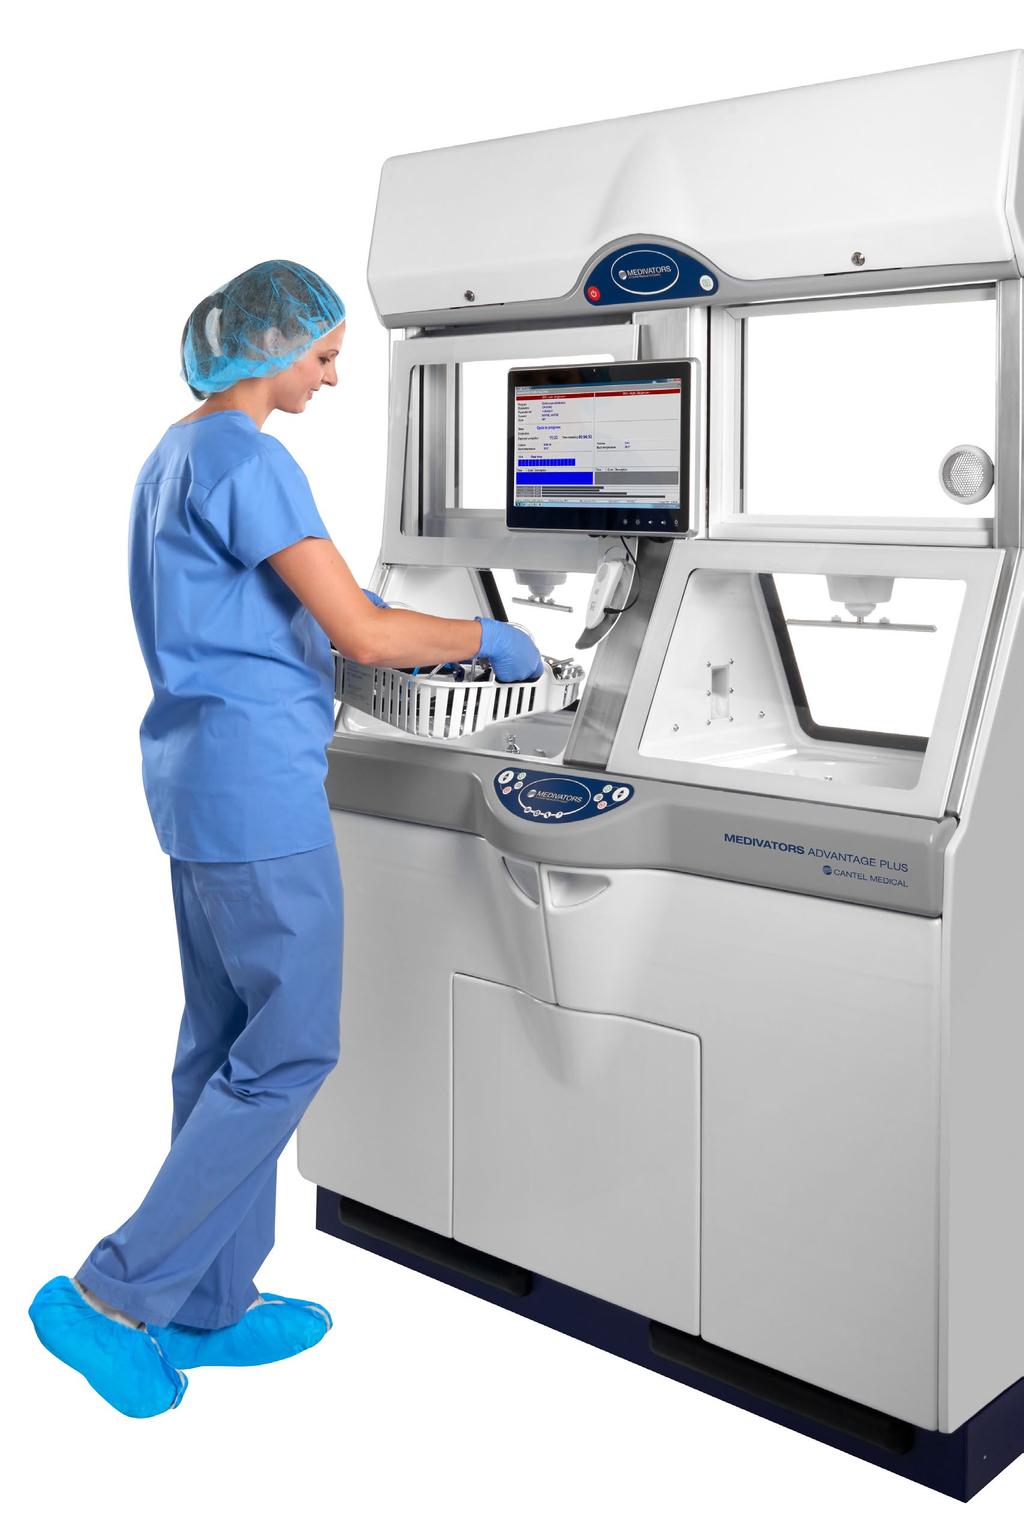 ADVANTAGE PLUS Pass-Thru Automated Endoscope Reprocessor Features: Hands-free operation and automatic cycle start for ease of operation.